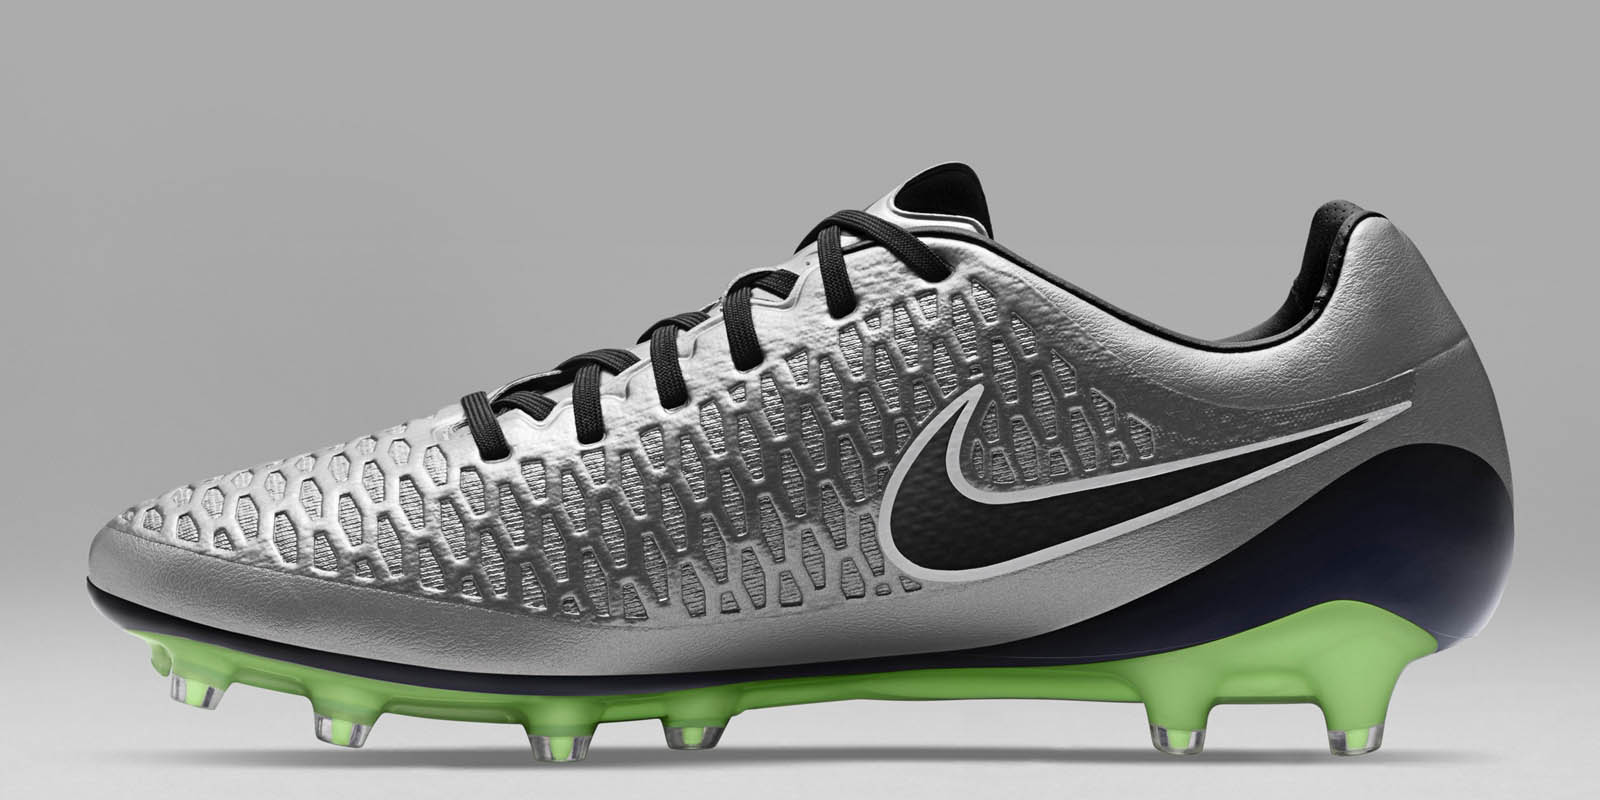 Silver Nike Magista 2016 Boots Released - Footy Headlines